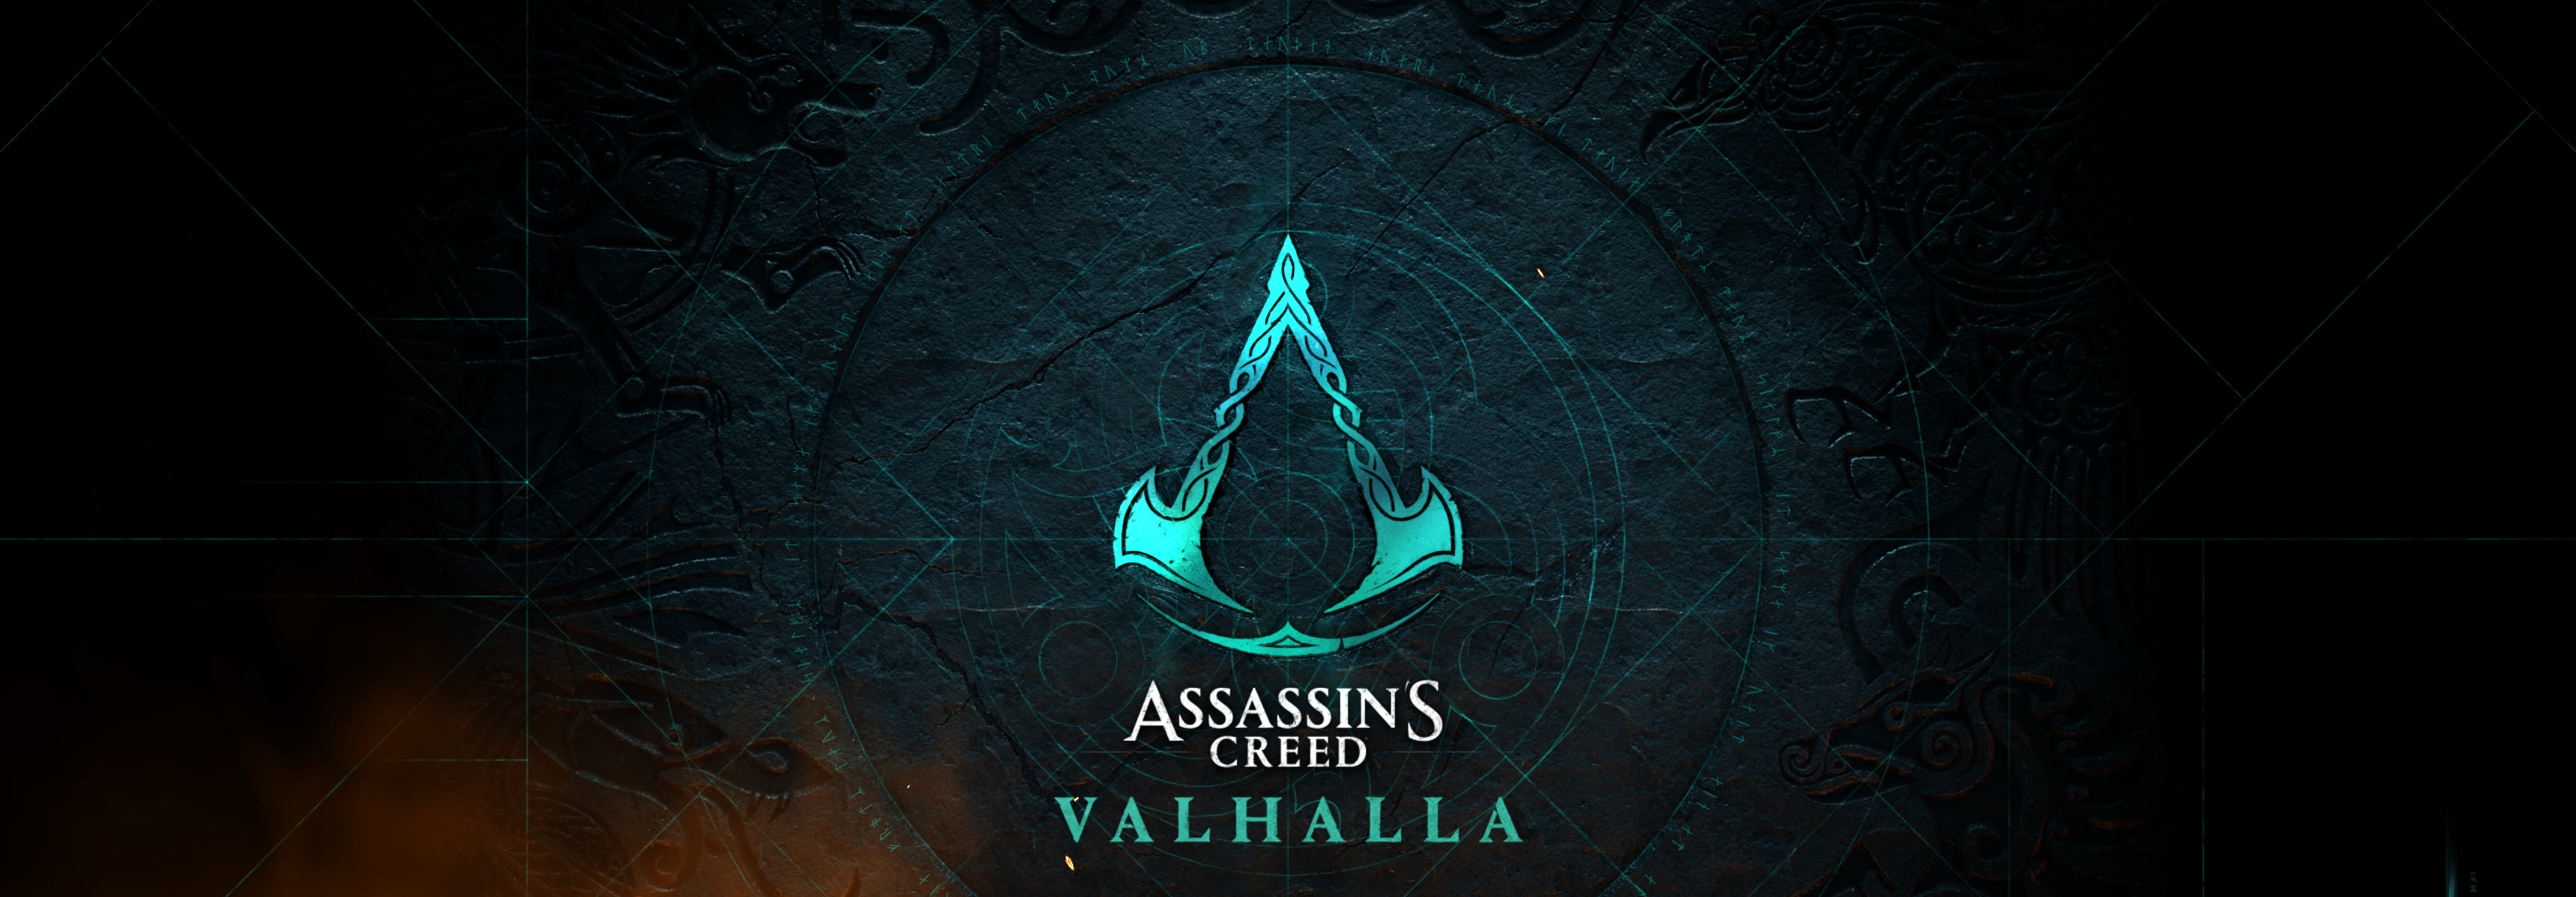 Assassin's Creed, video games, Assassin's Creed: Valhalla, Assassin's Creed Valhalla